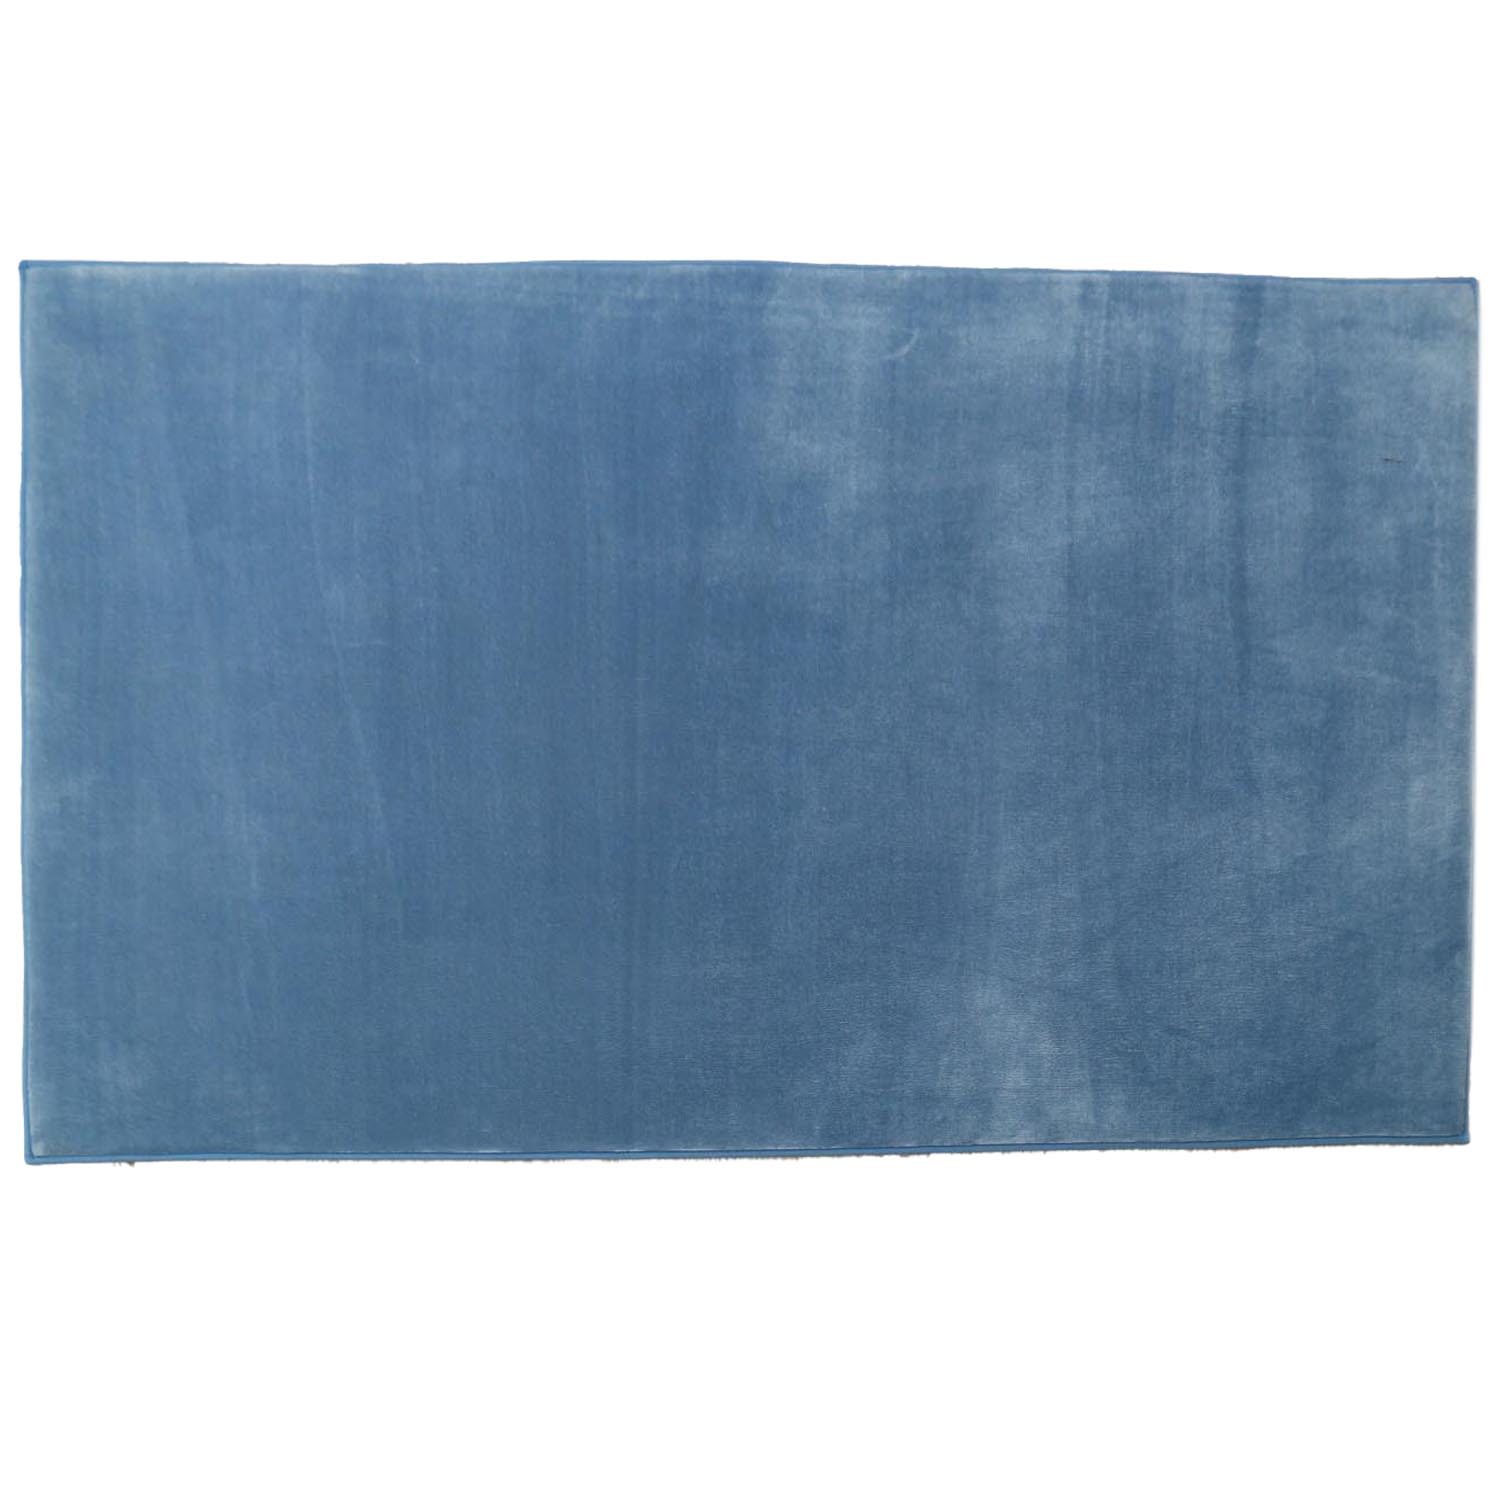 Blue Flannel Cosy Rug 160 x 110cm Image 1